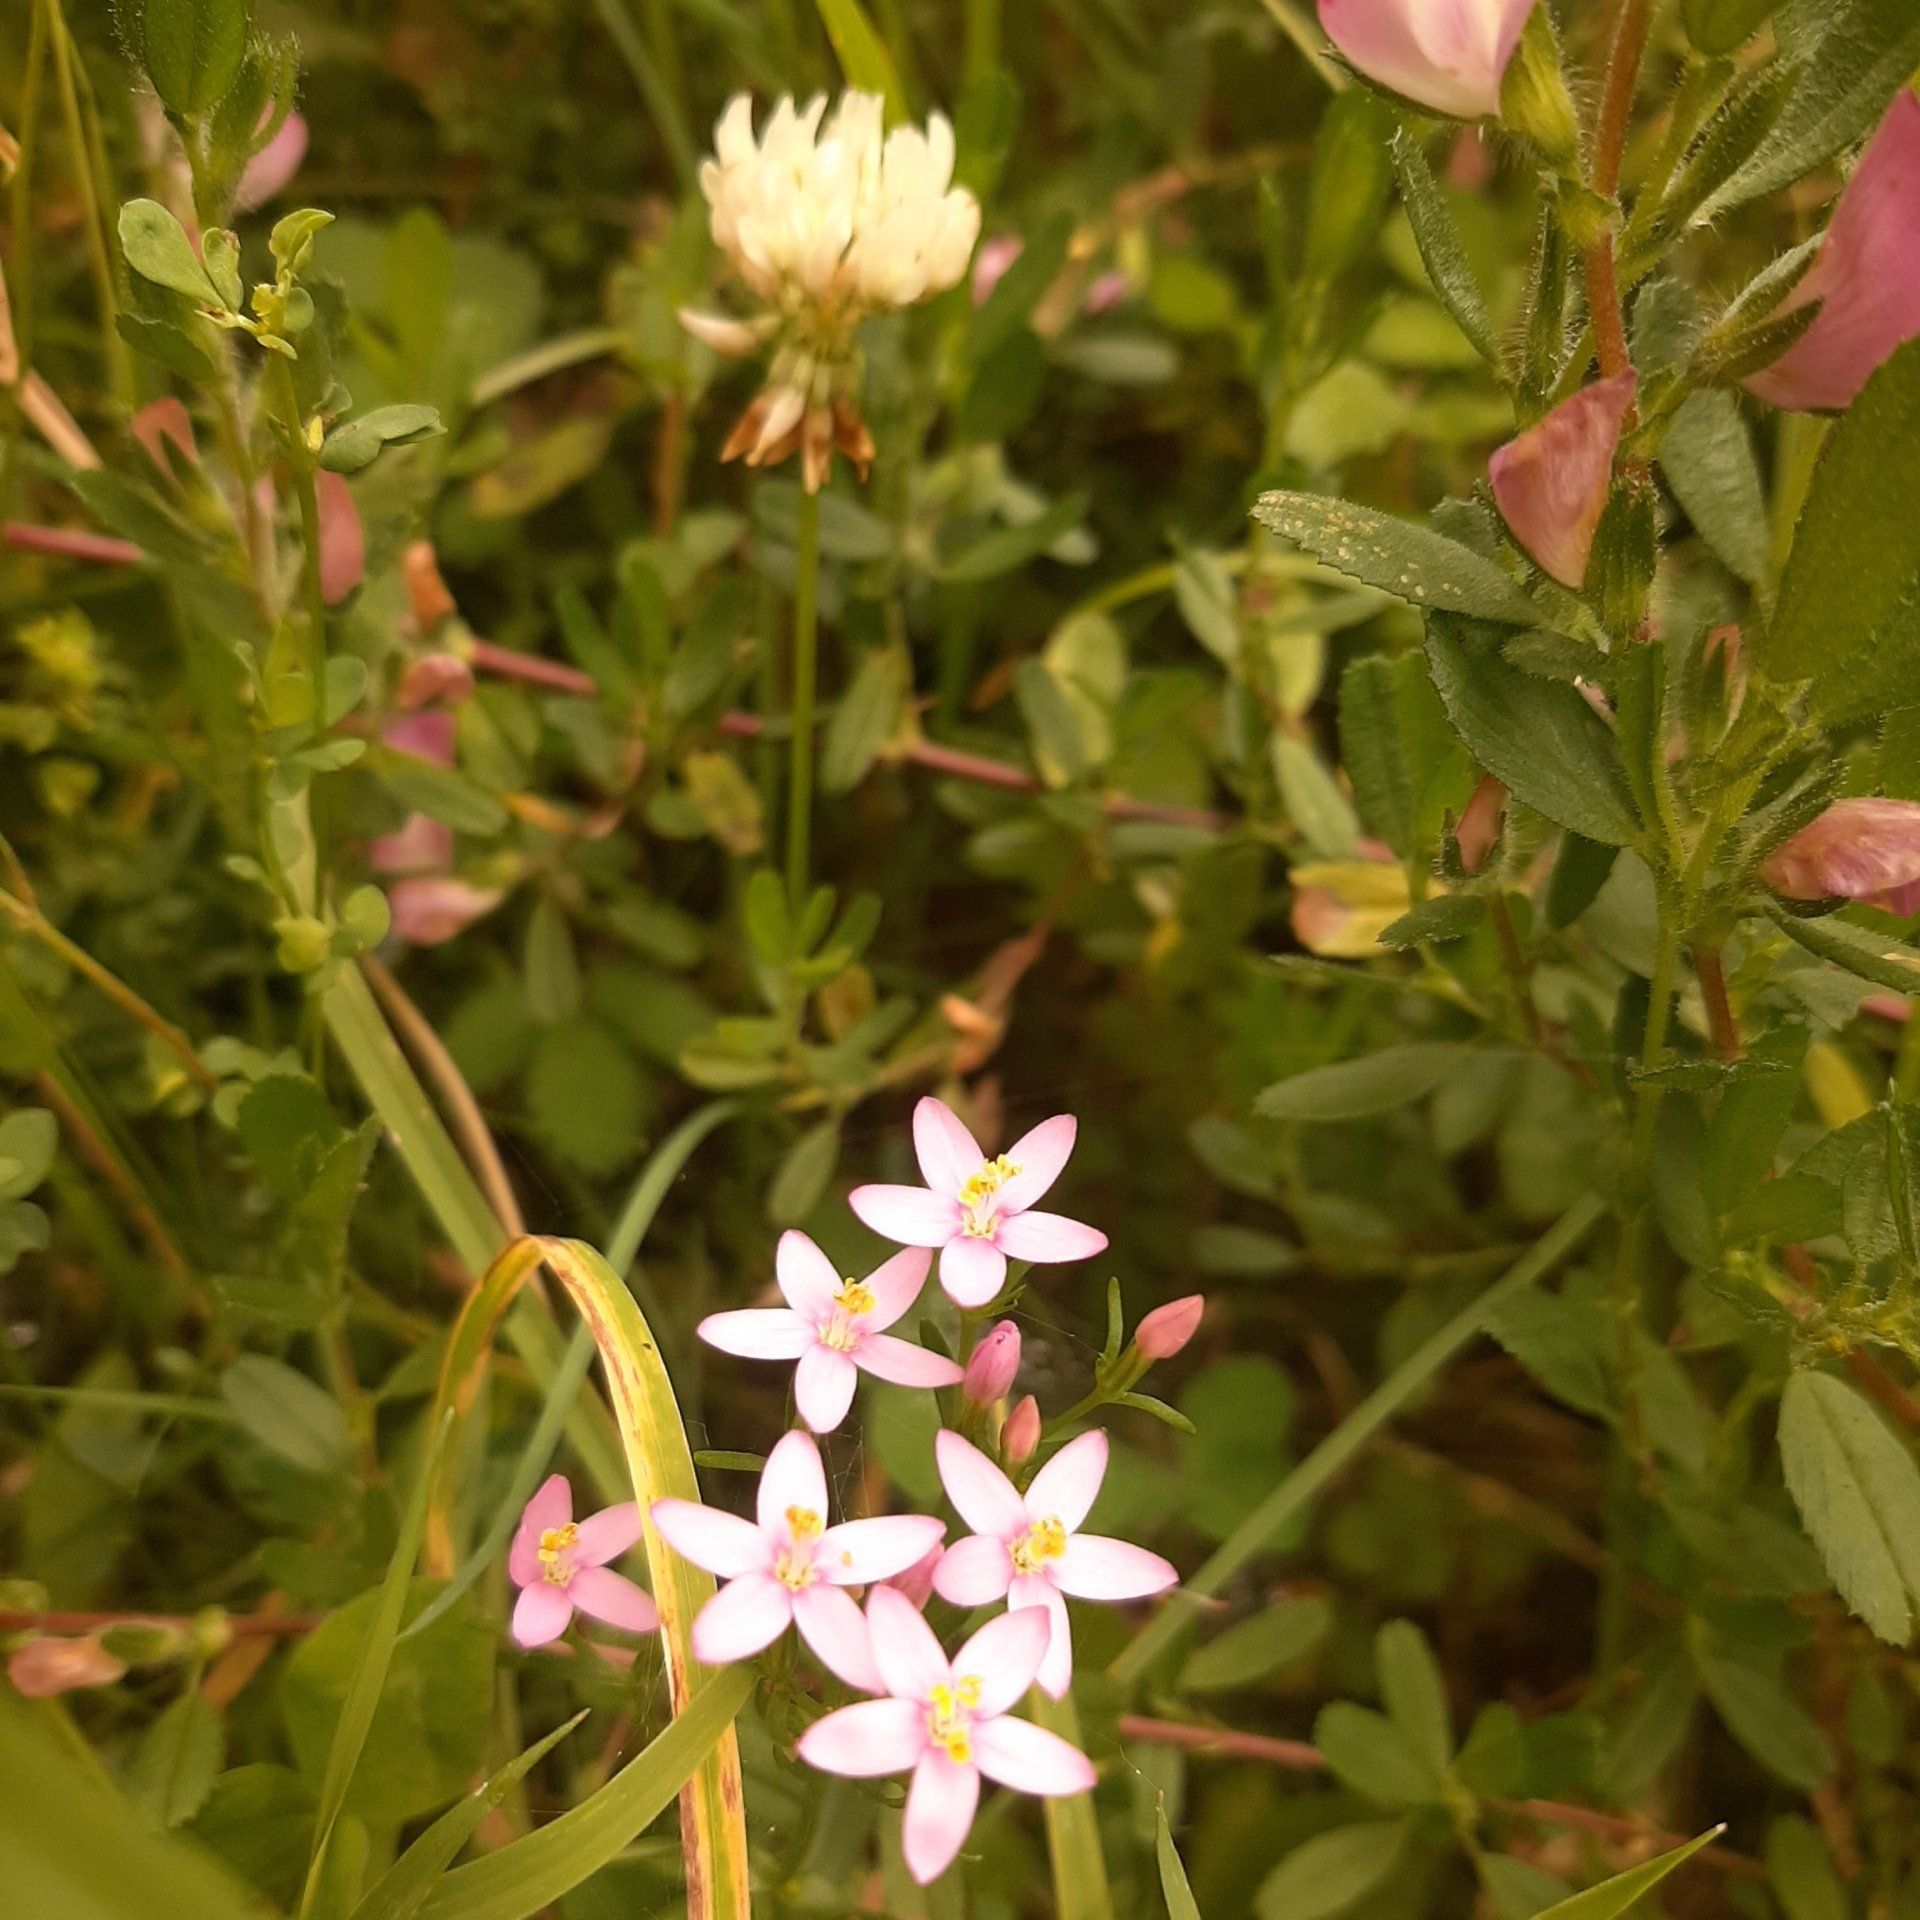 An image of wild flowers